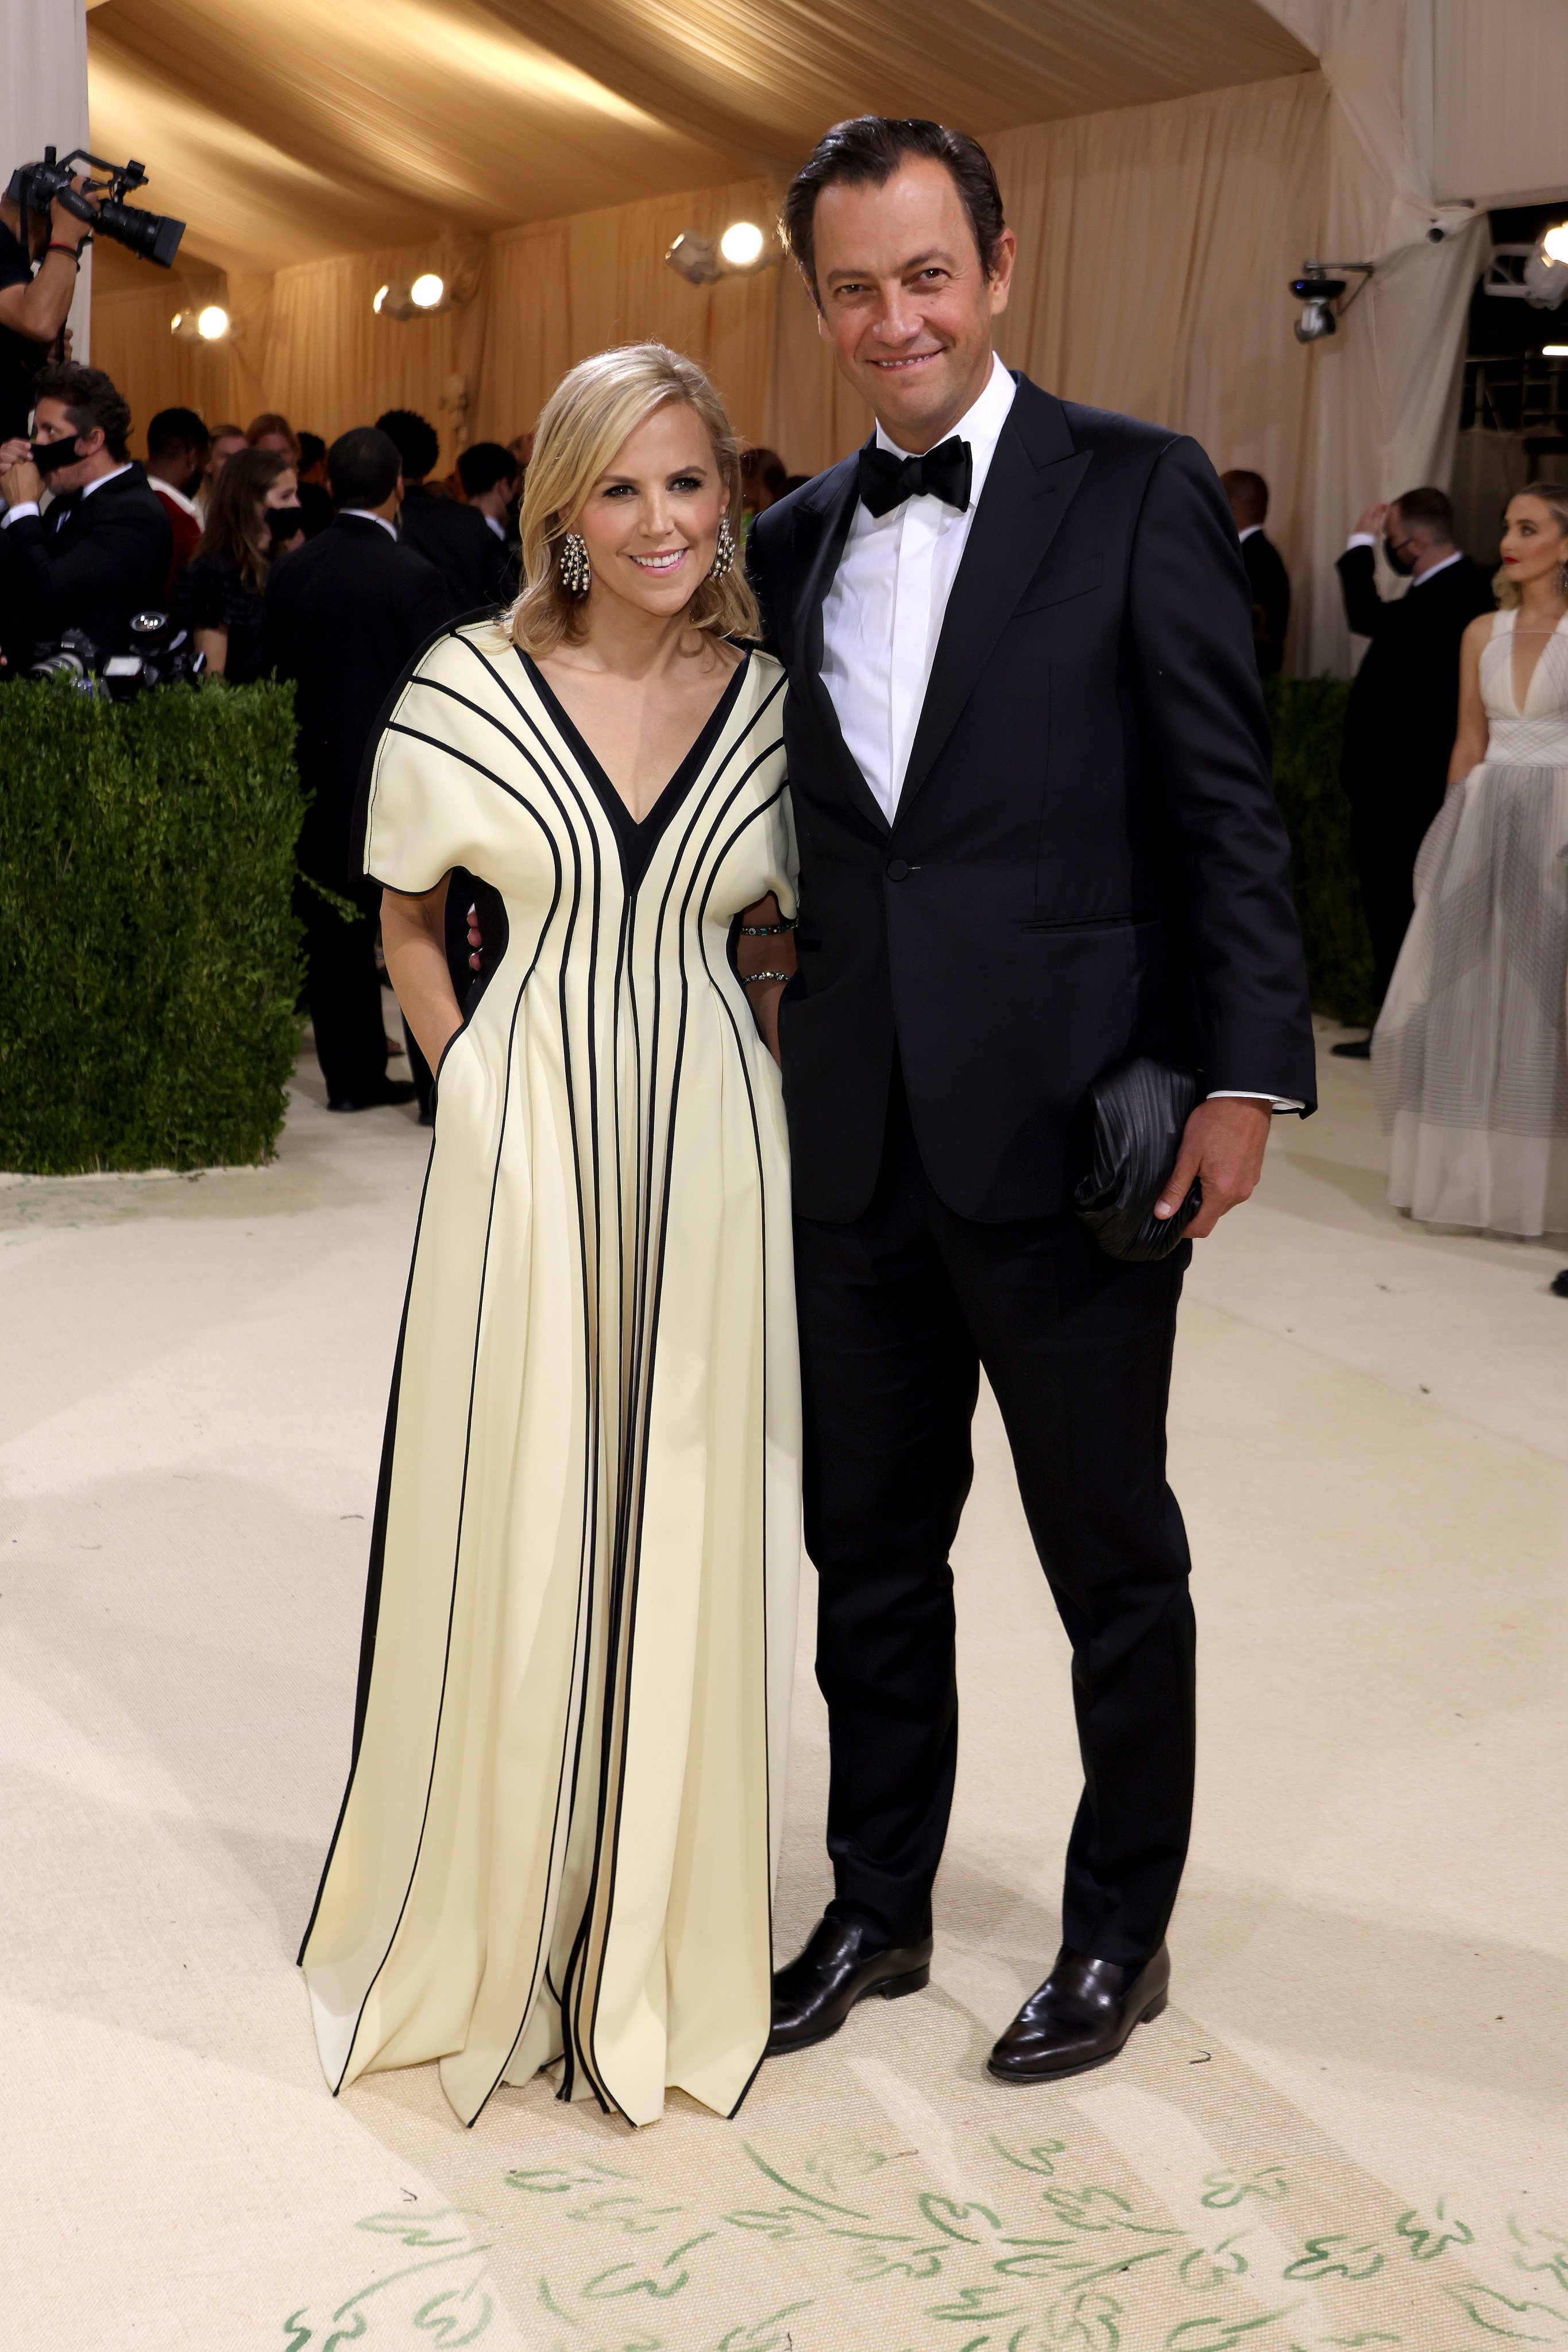 Tory Burch CEO Pierre-Yves Roussel (right) with his wife, designer Tory Burch, at the 2021 Met Gala in New York. Photo: WireImage